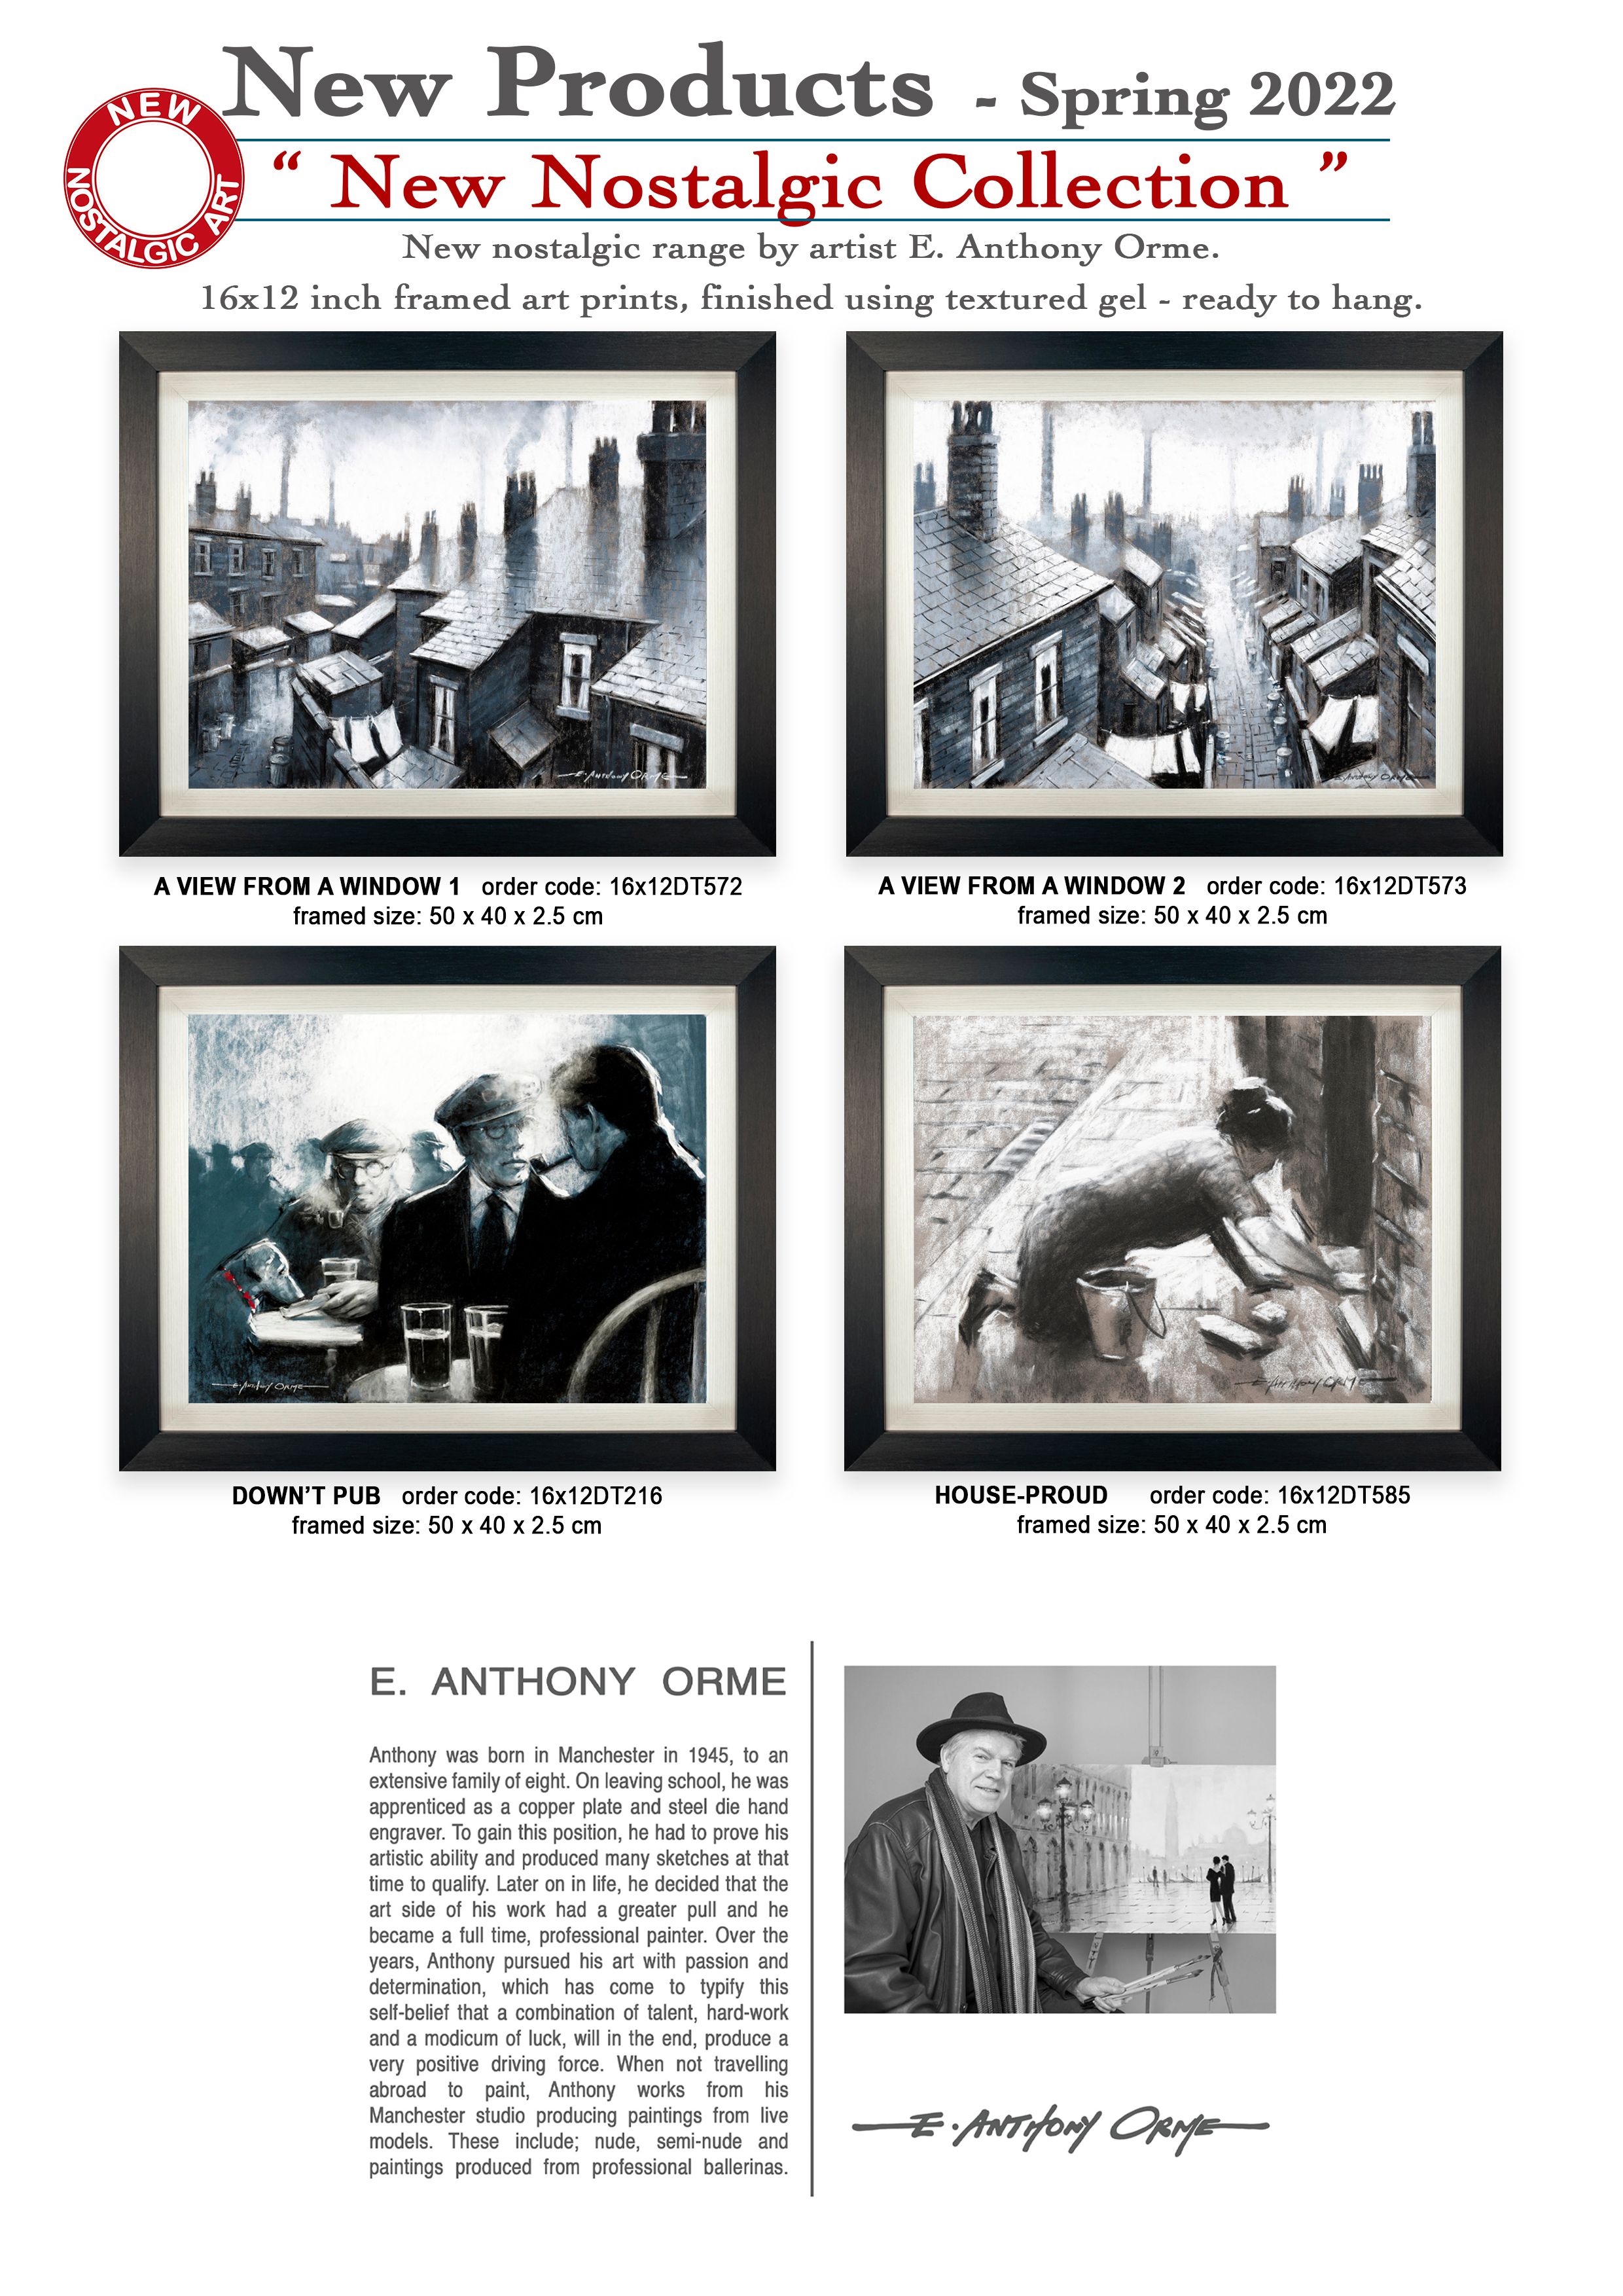 New Nostalgic Range by artist E. Anthony Orme.  16x12in framed art prints, finished using textured gel - ready to hang.